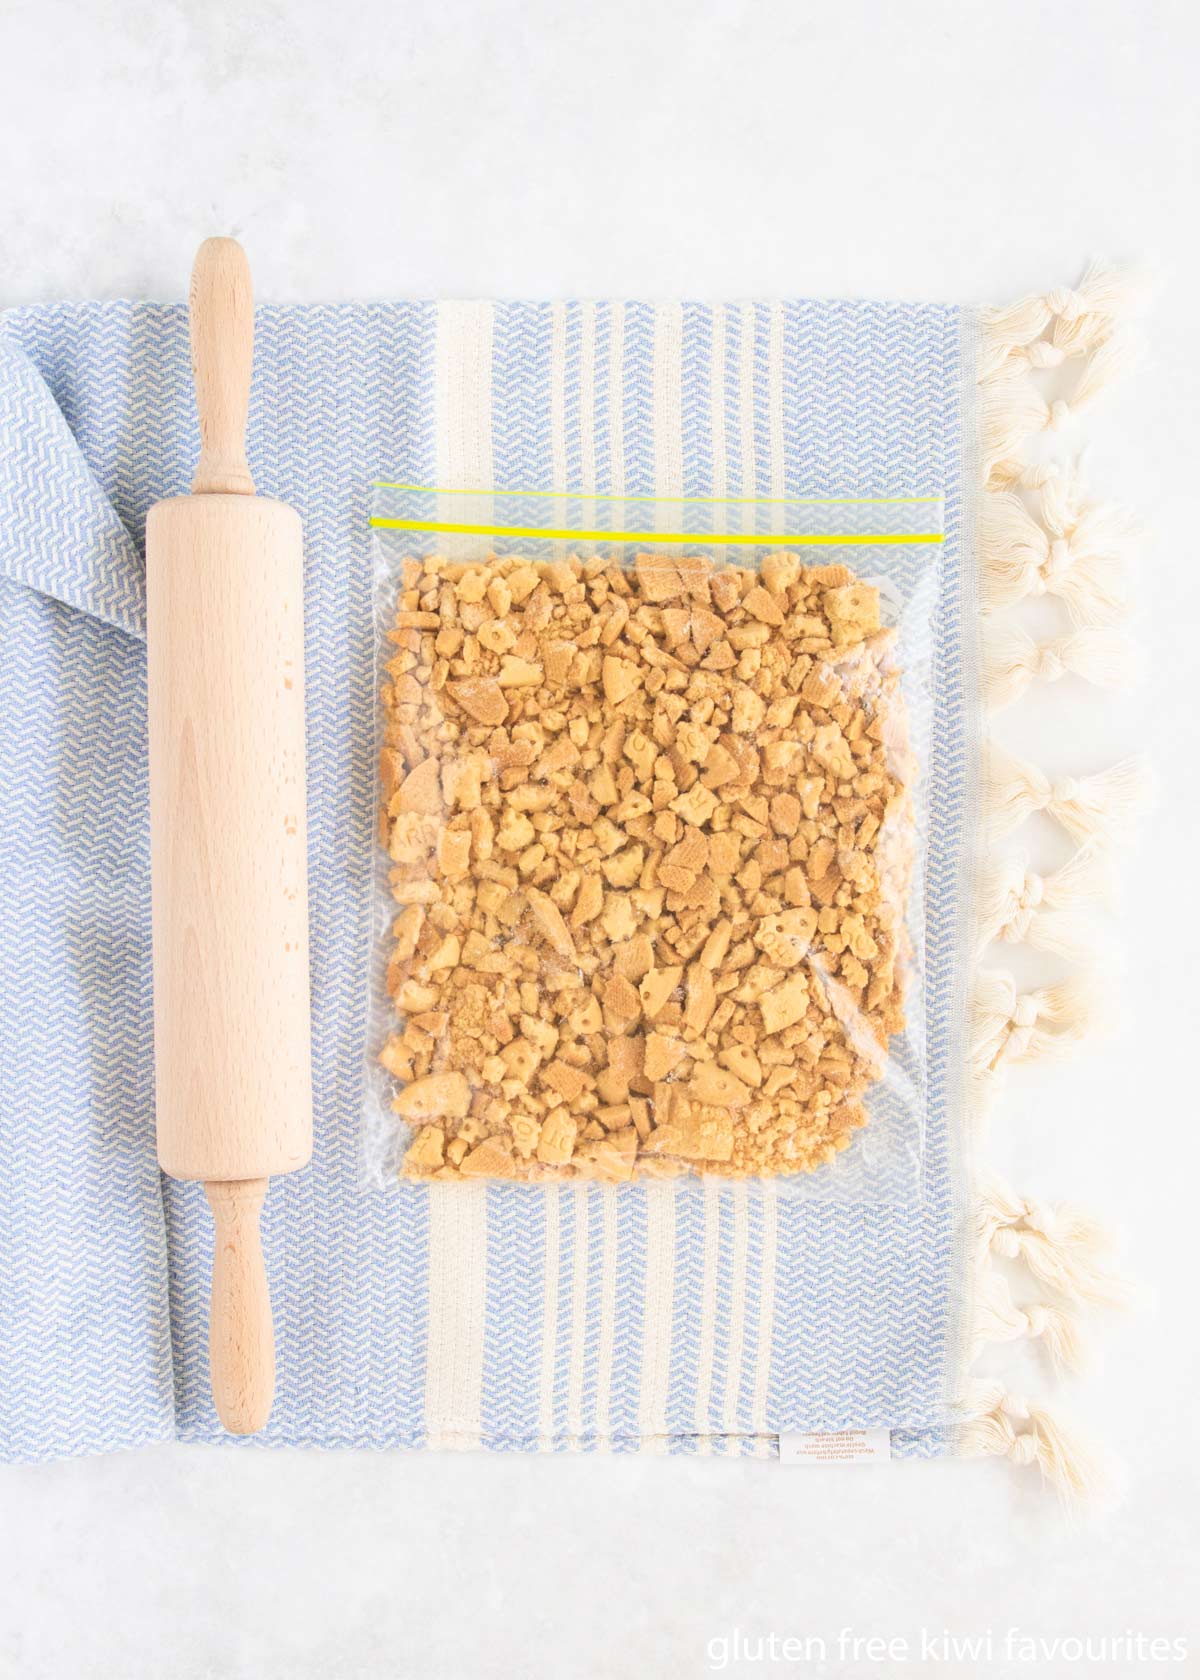 Gluten free arrowroot biscuits being crushed in a plastic bag with a rolling pin.